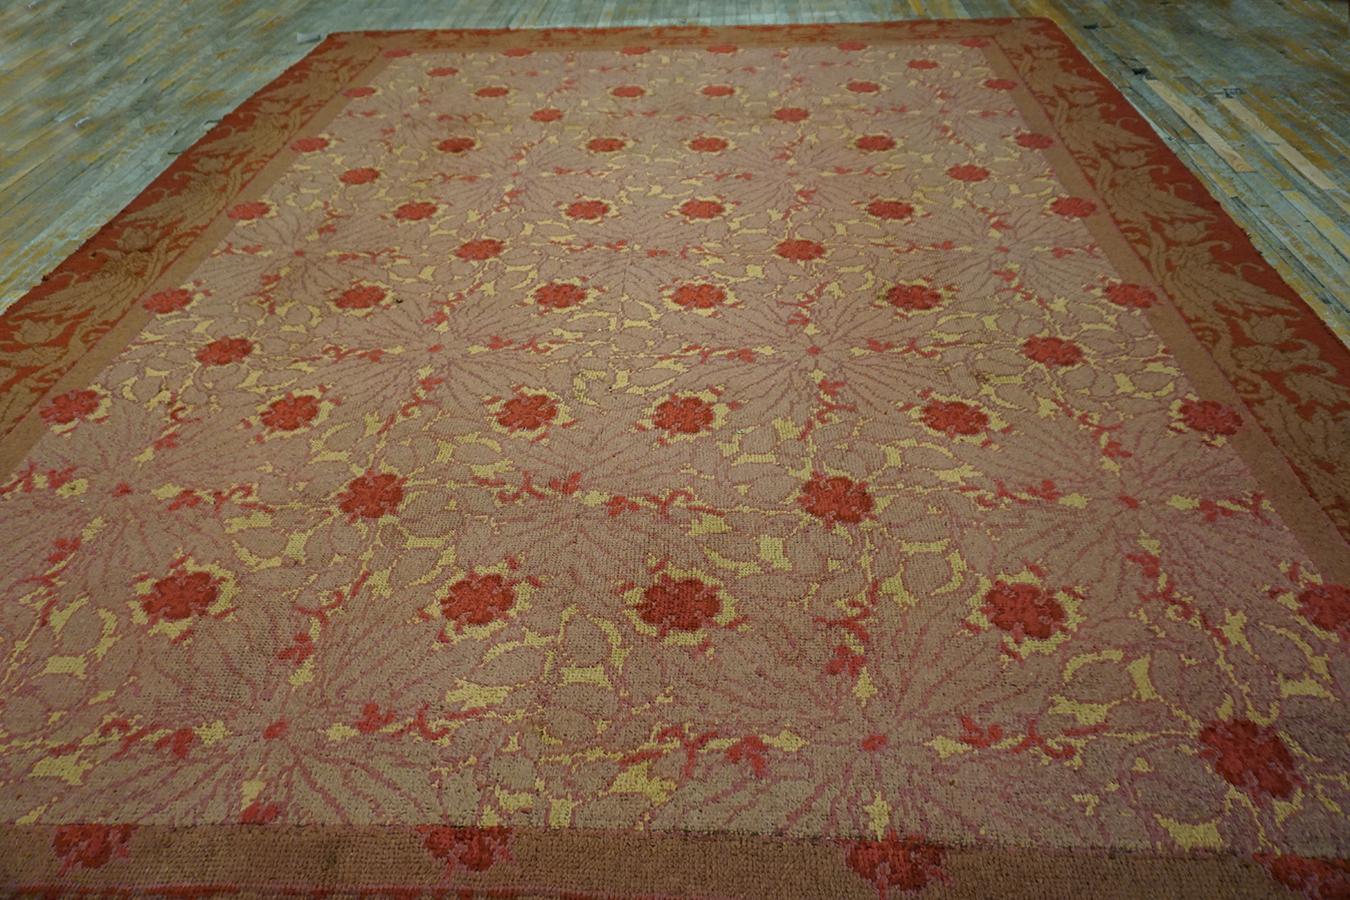 Hand-Knotted Early 20th Century Irish Donegal Arts & Crafts Carpet (10'8